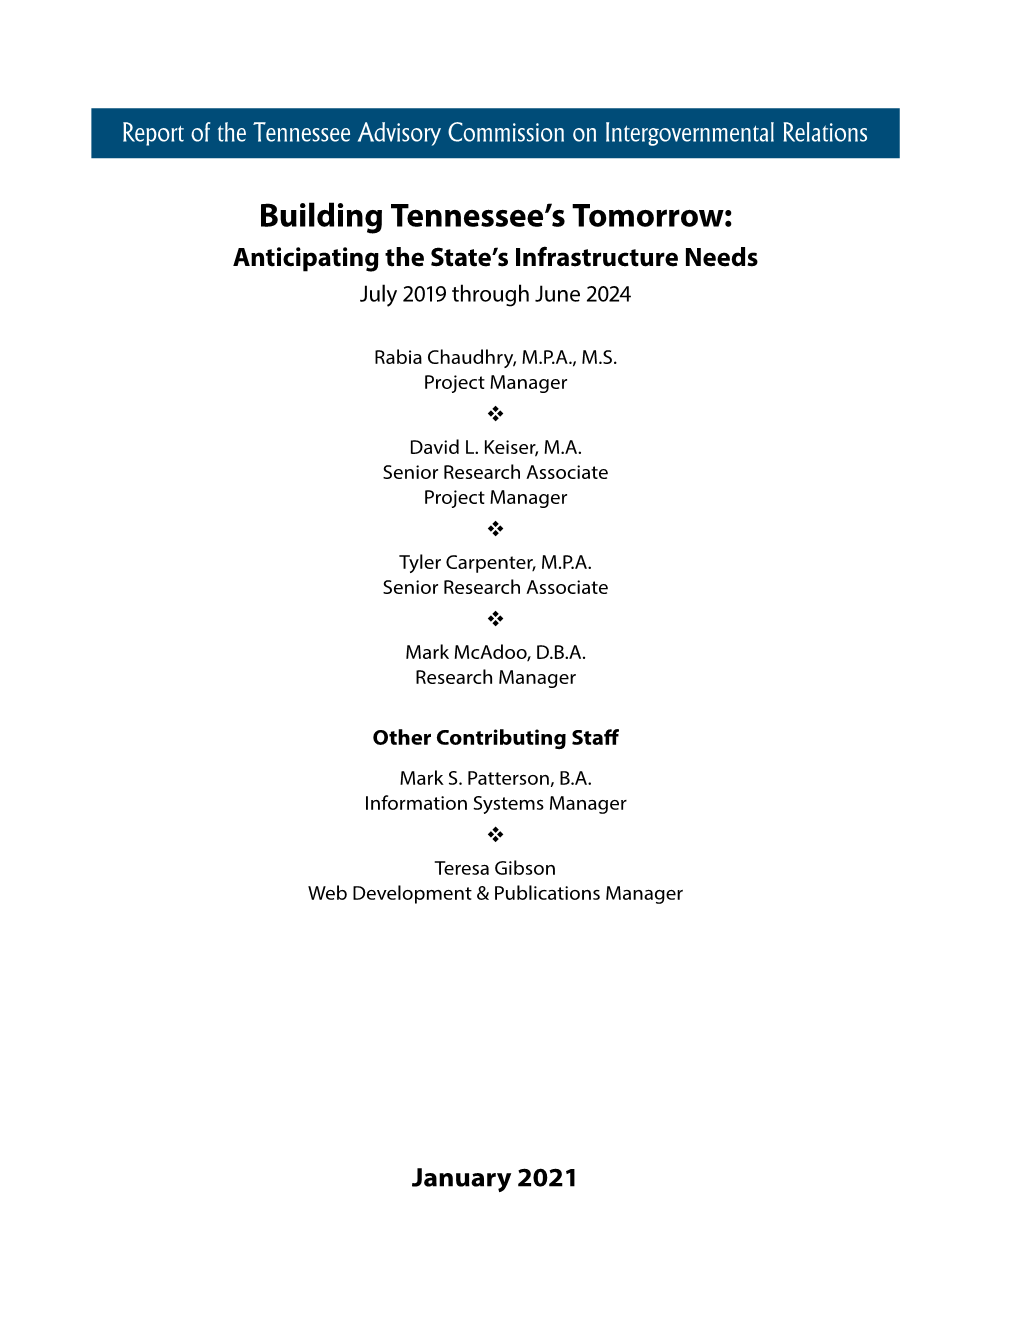 Building Tennessee's Tomorrow: Anticipating the State's